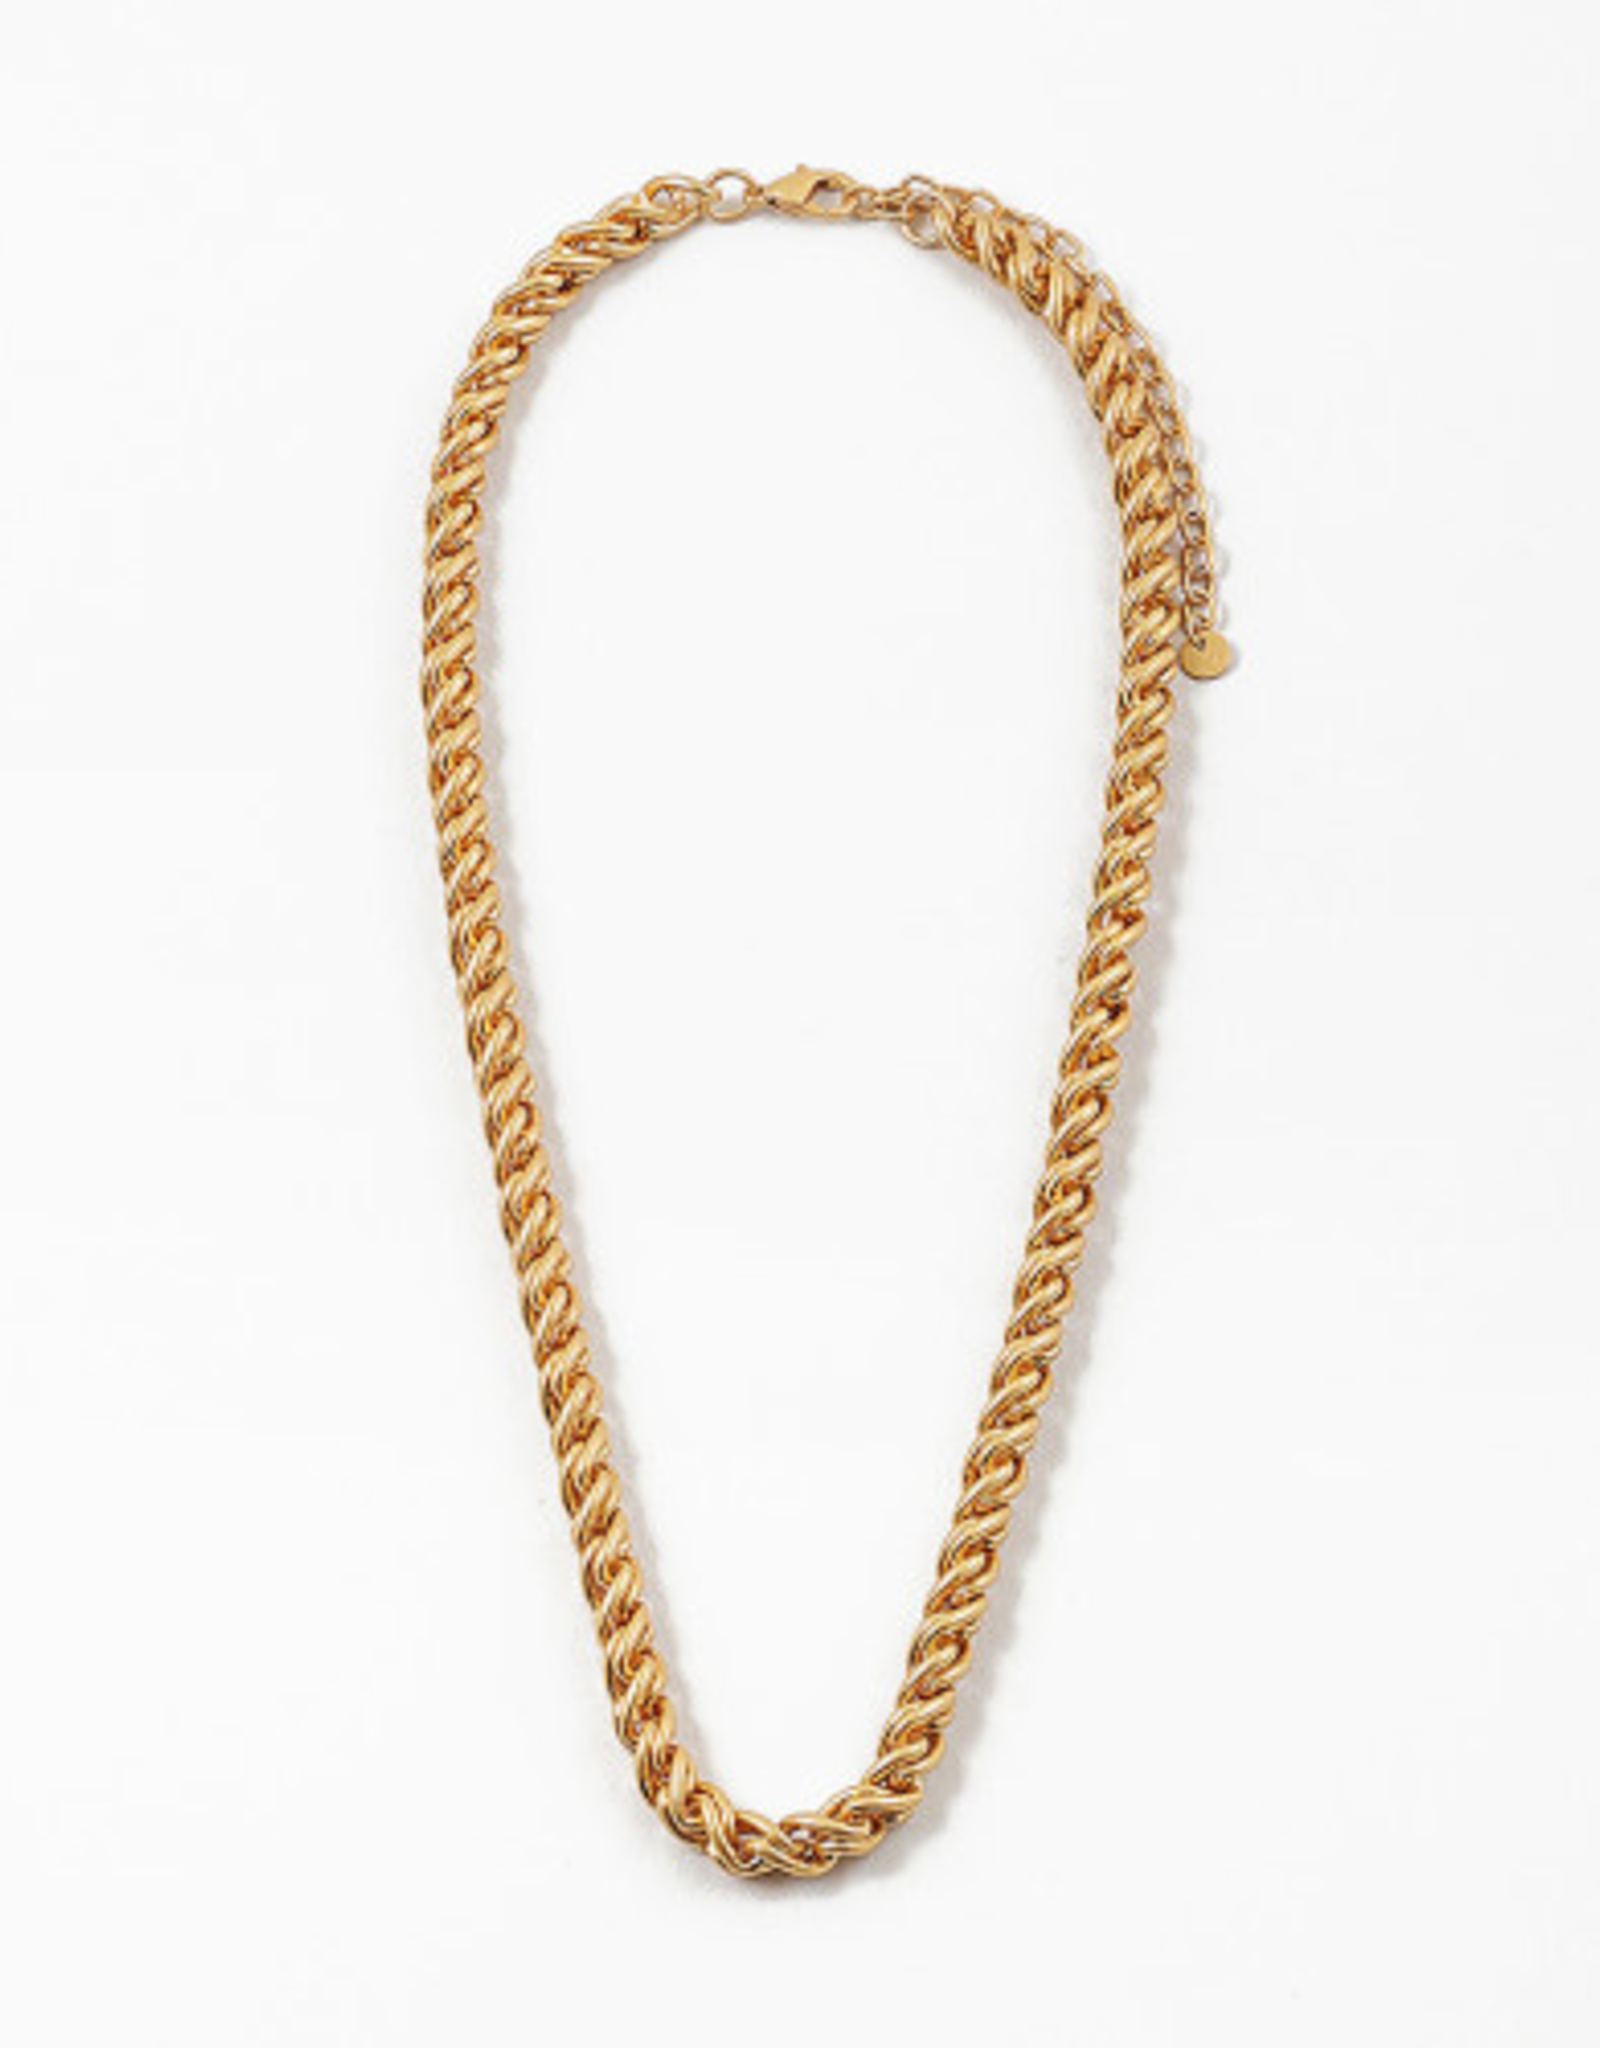 Blue Suede Jewels Gold Twisted Chain Necklace